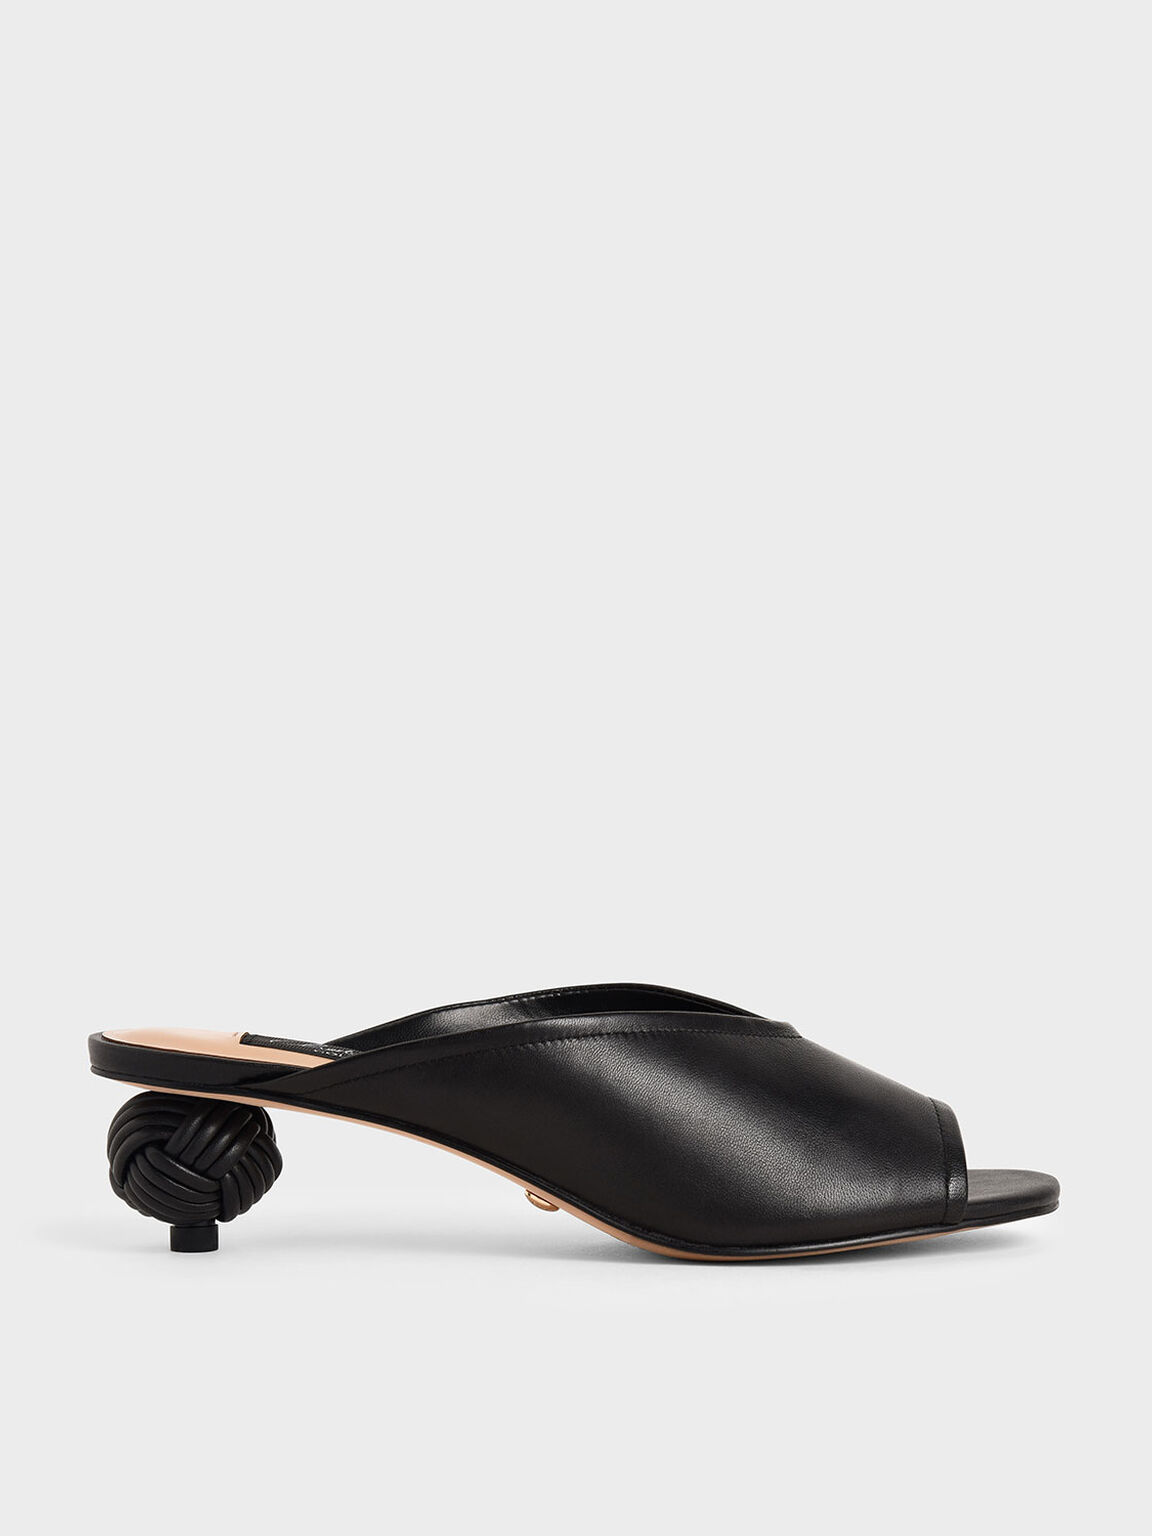 Black Leather Sculptural Heel Open Toe Mules | CHARLES & KEITH US